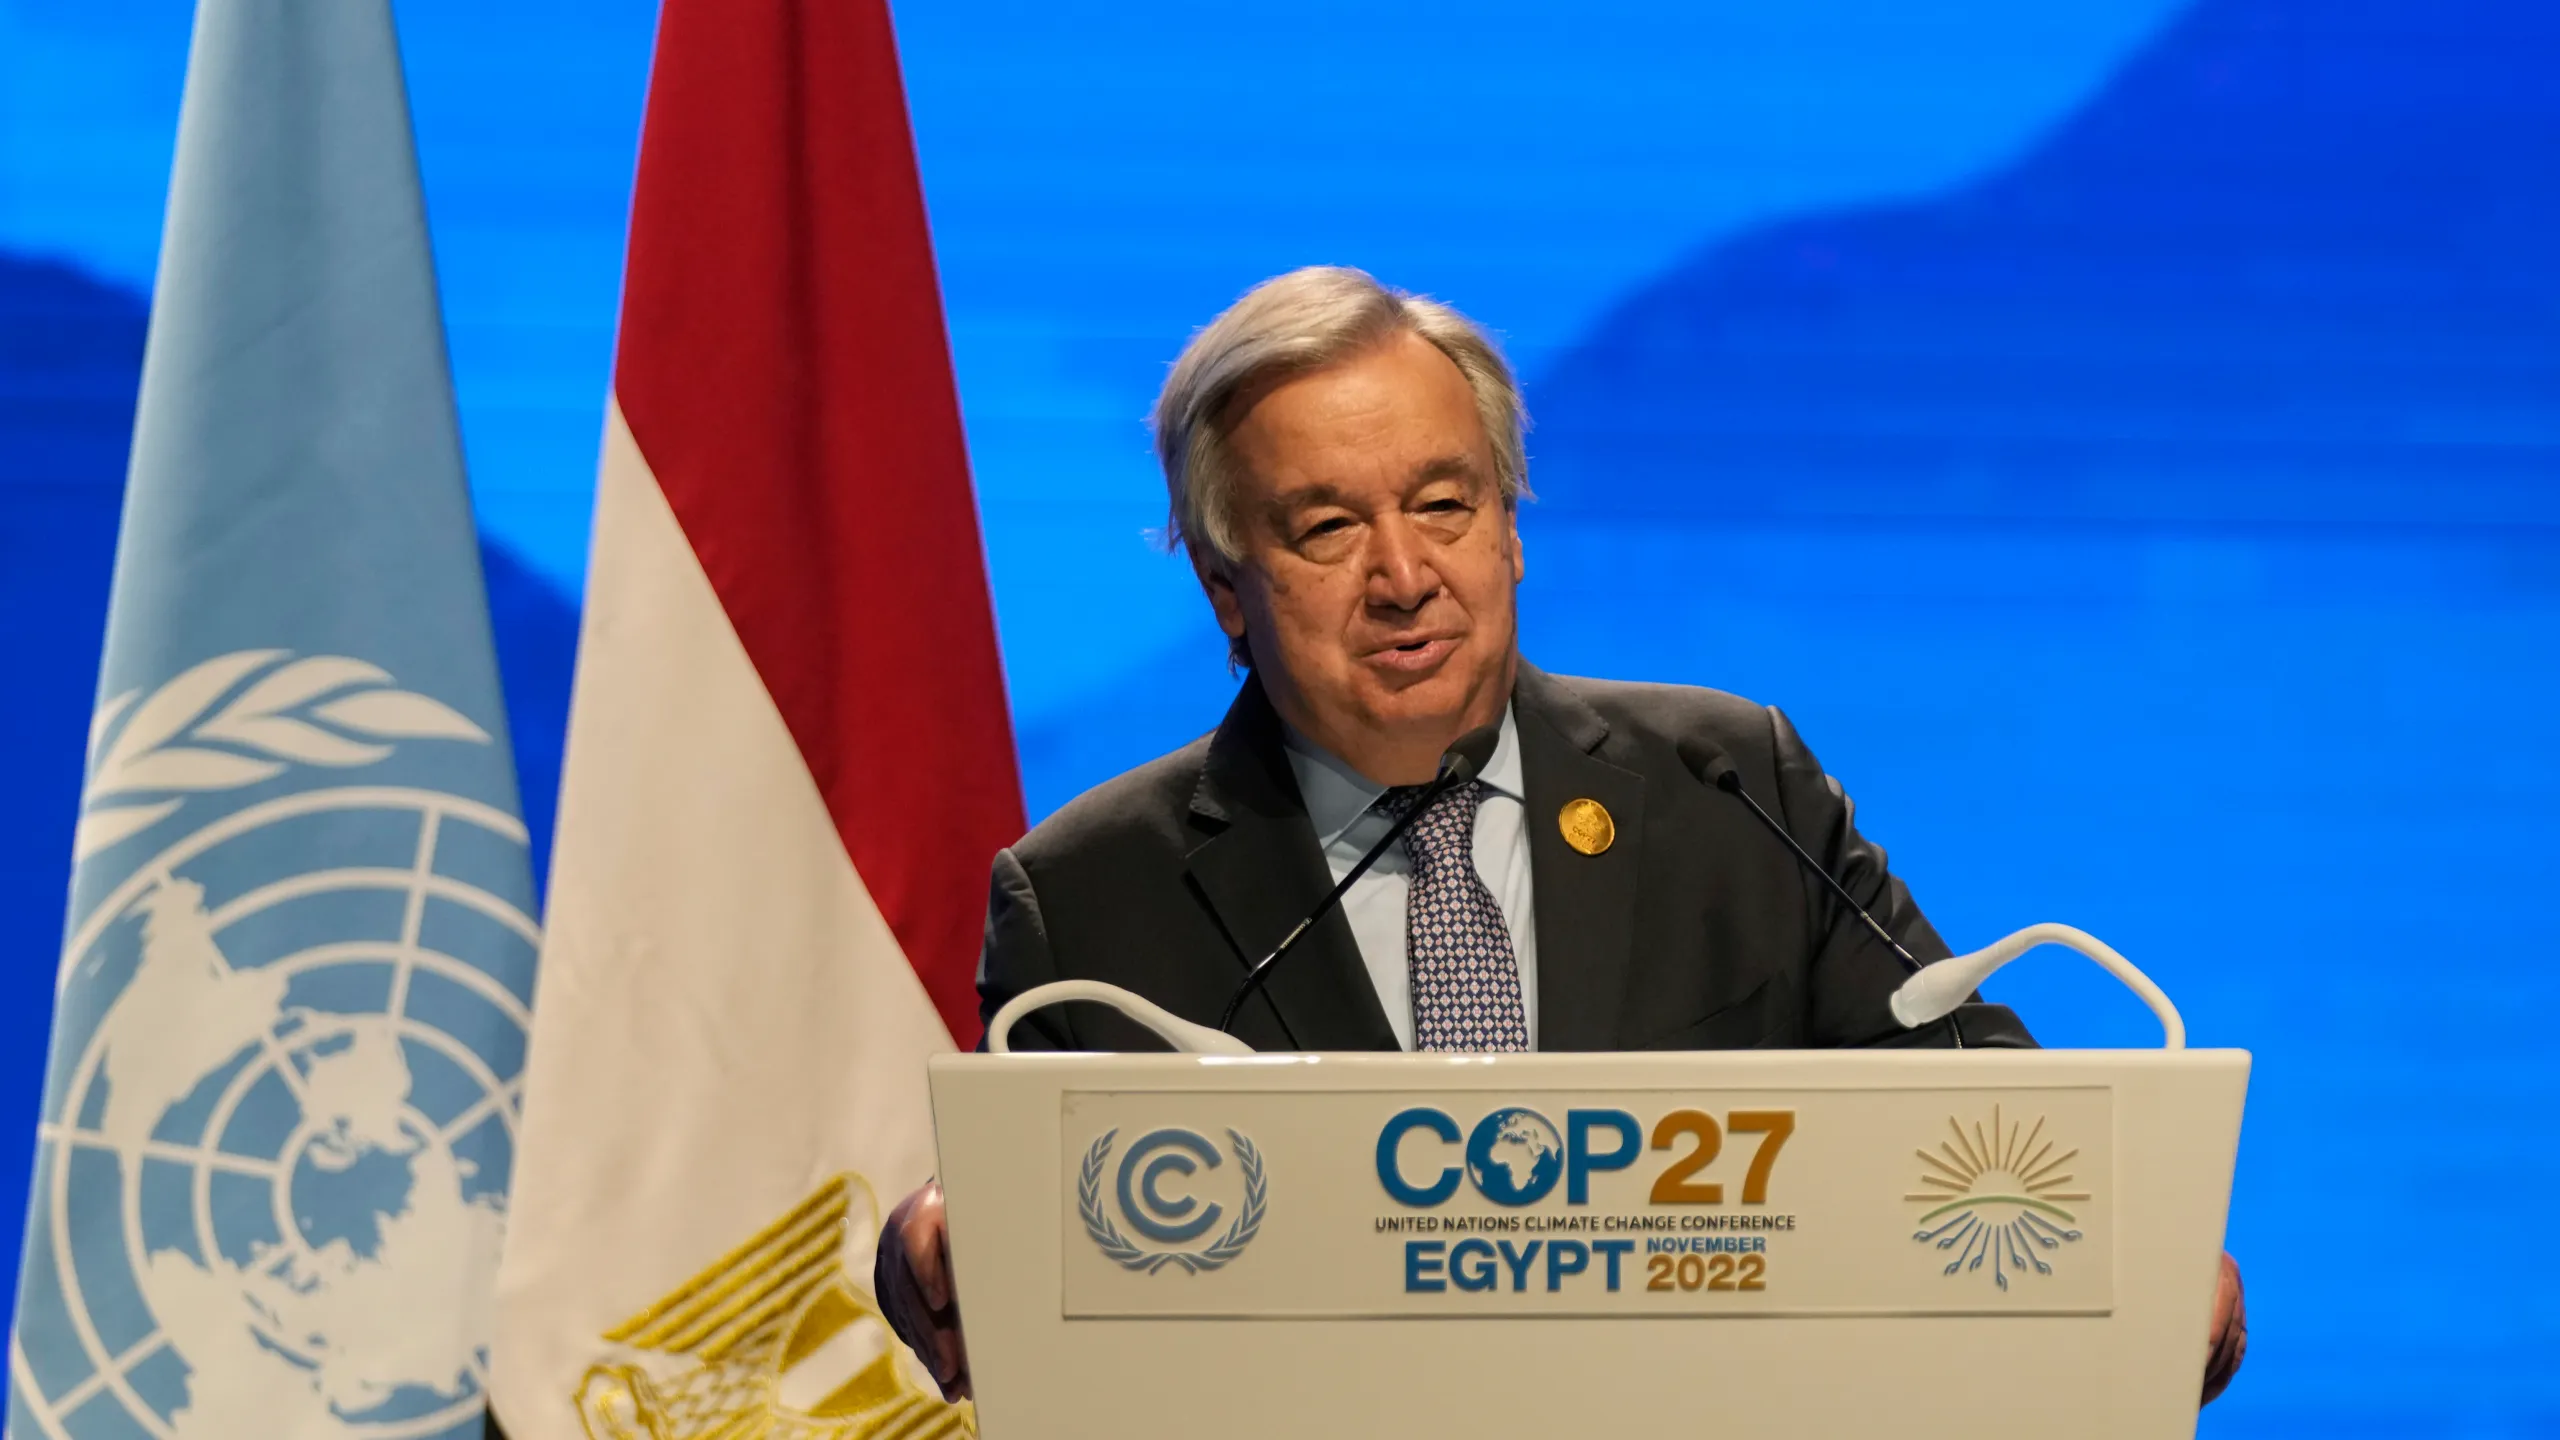 UN chief calls for credible climate action on global boiling, convenes summit